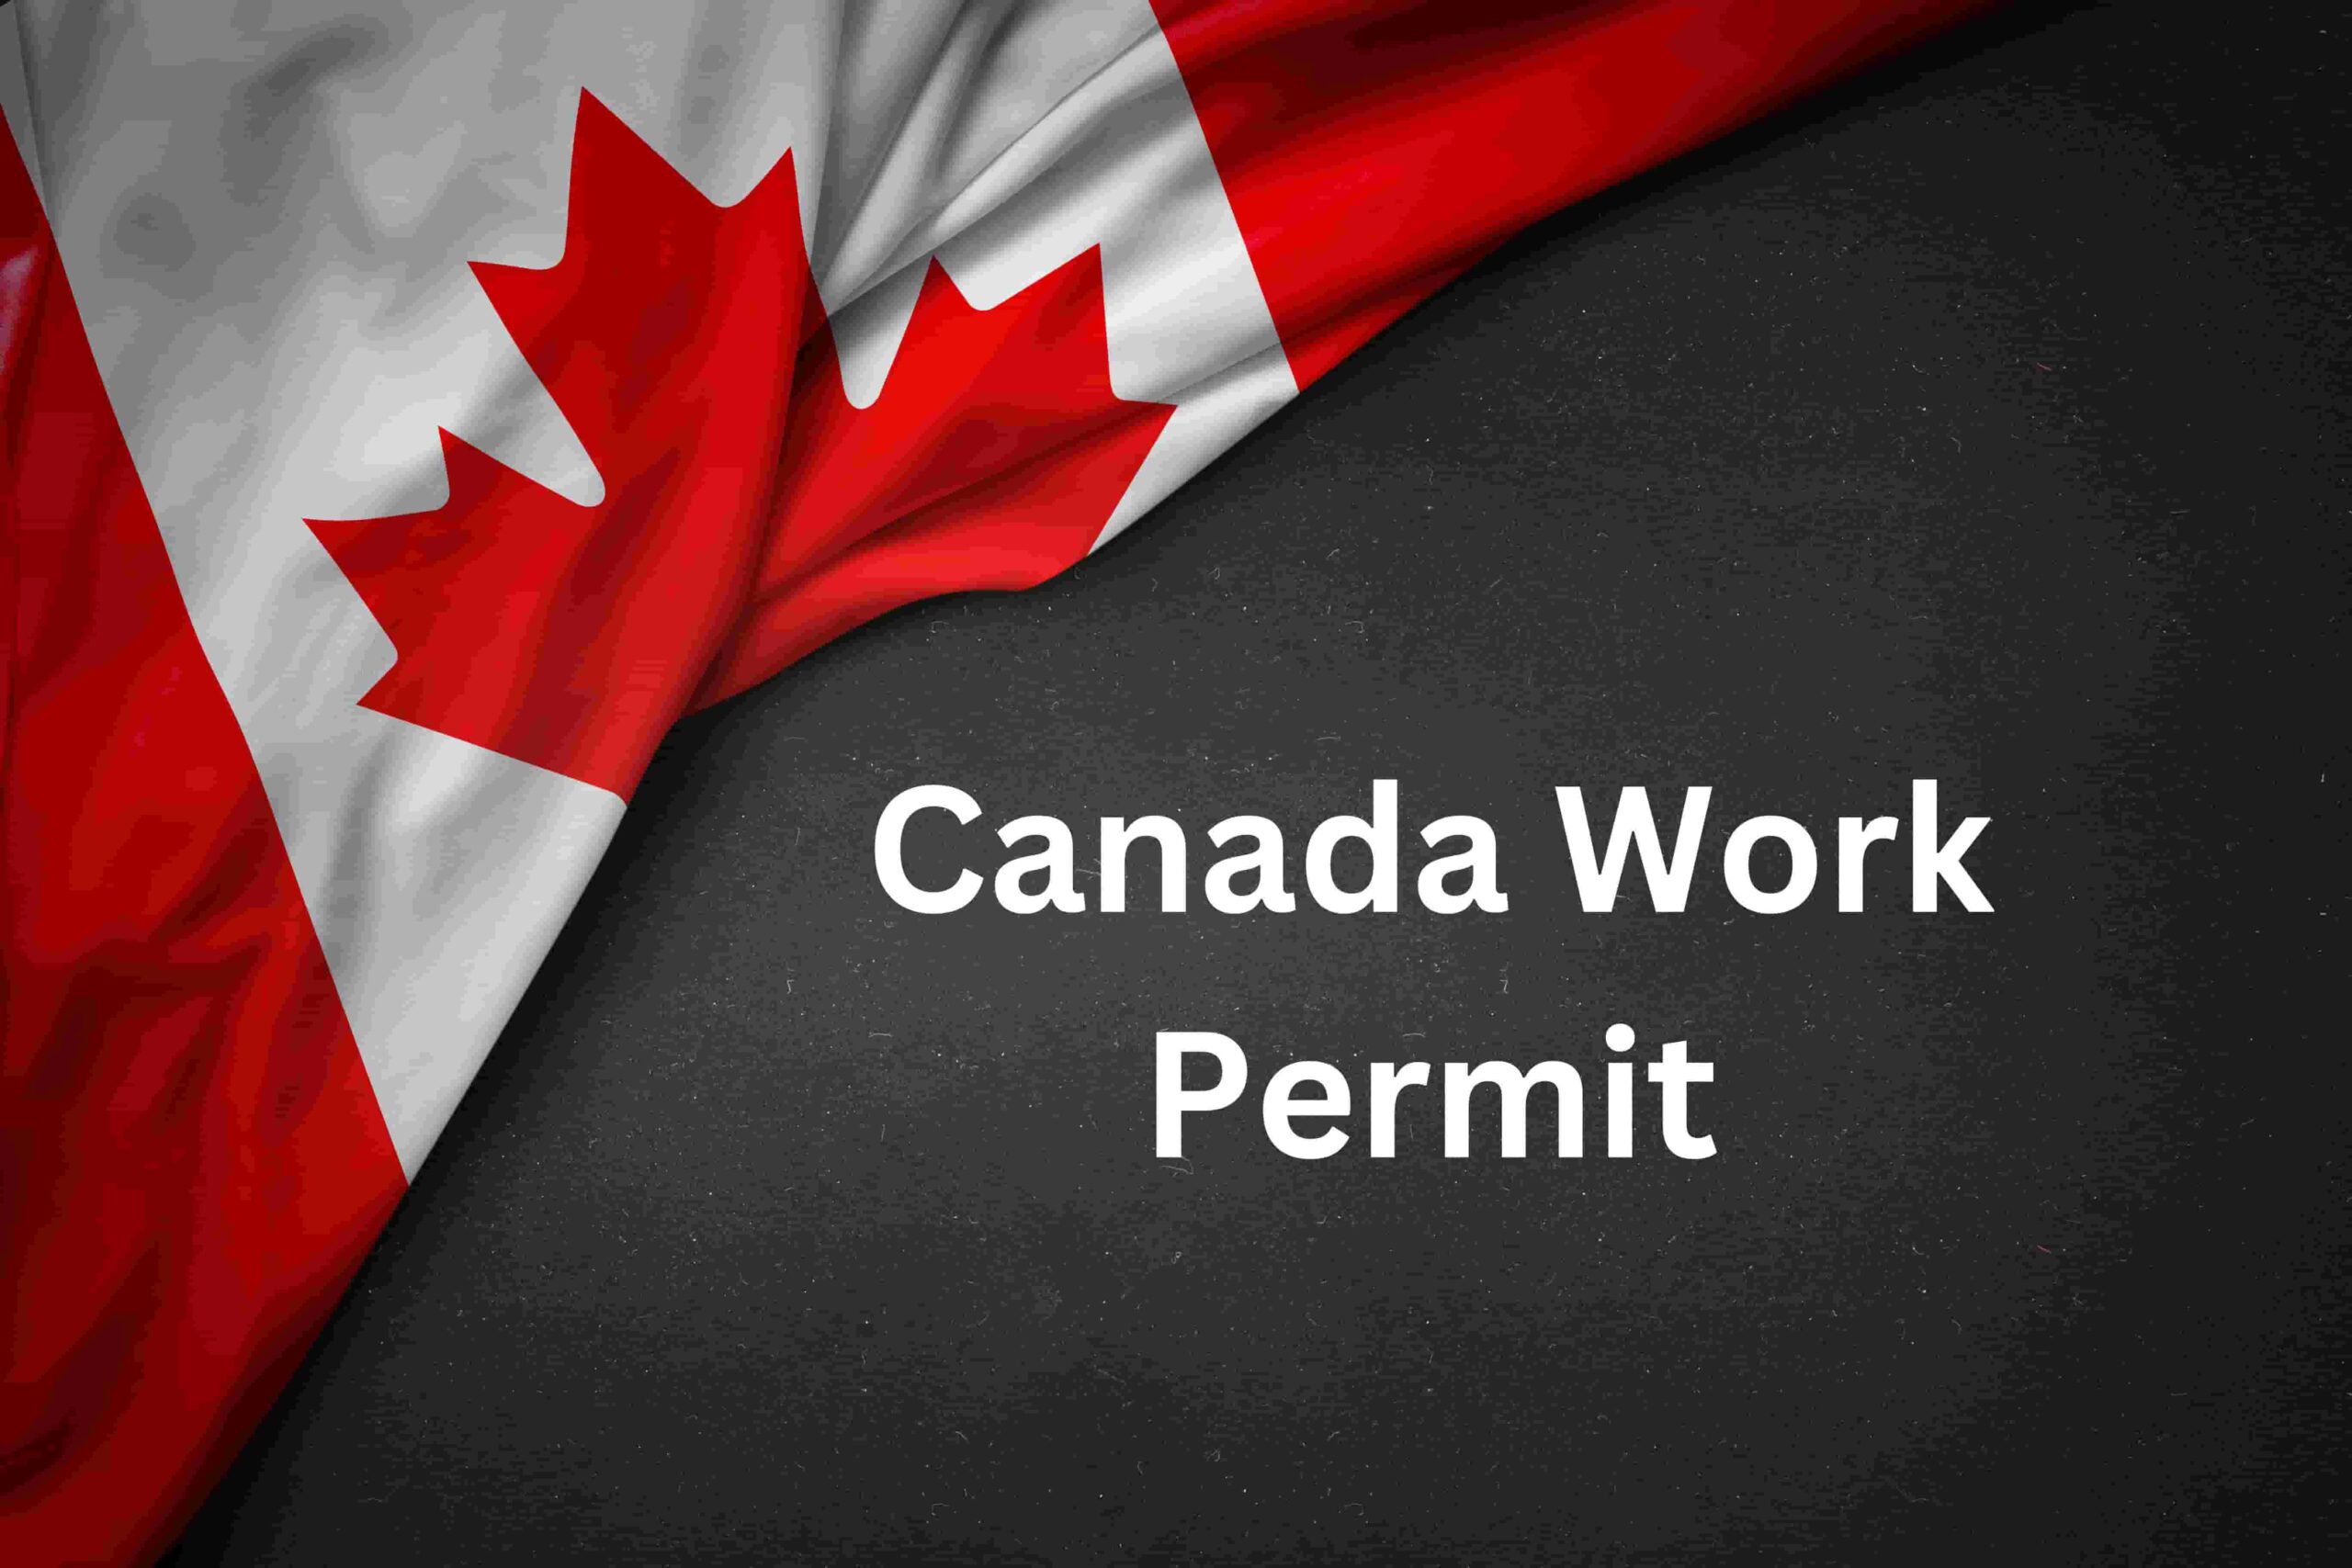 Canada Work Permit: Eligibility, Advantages, and Application Process